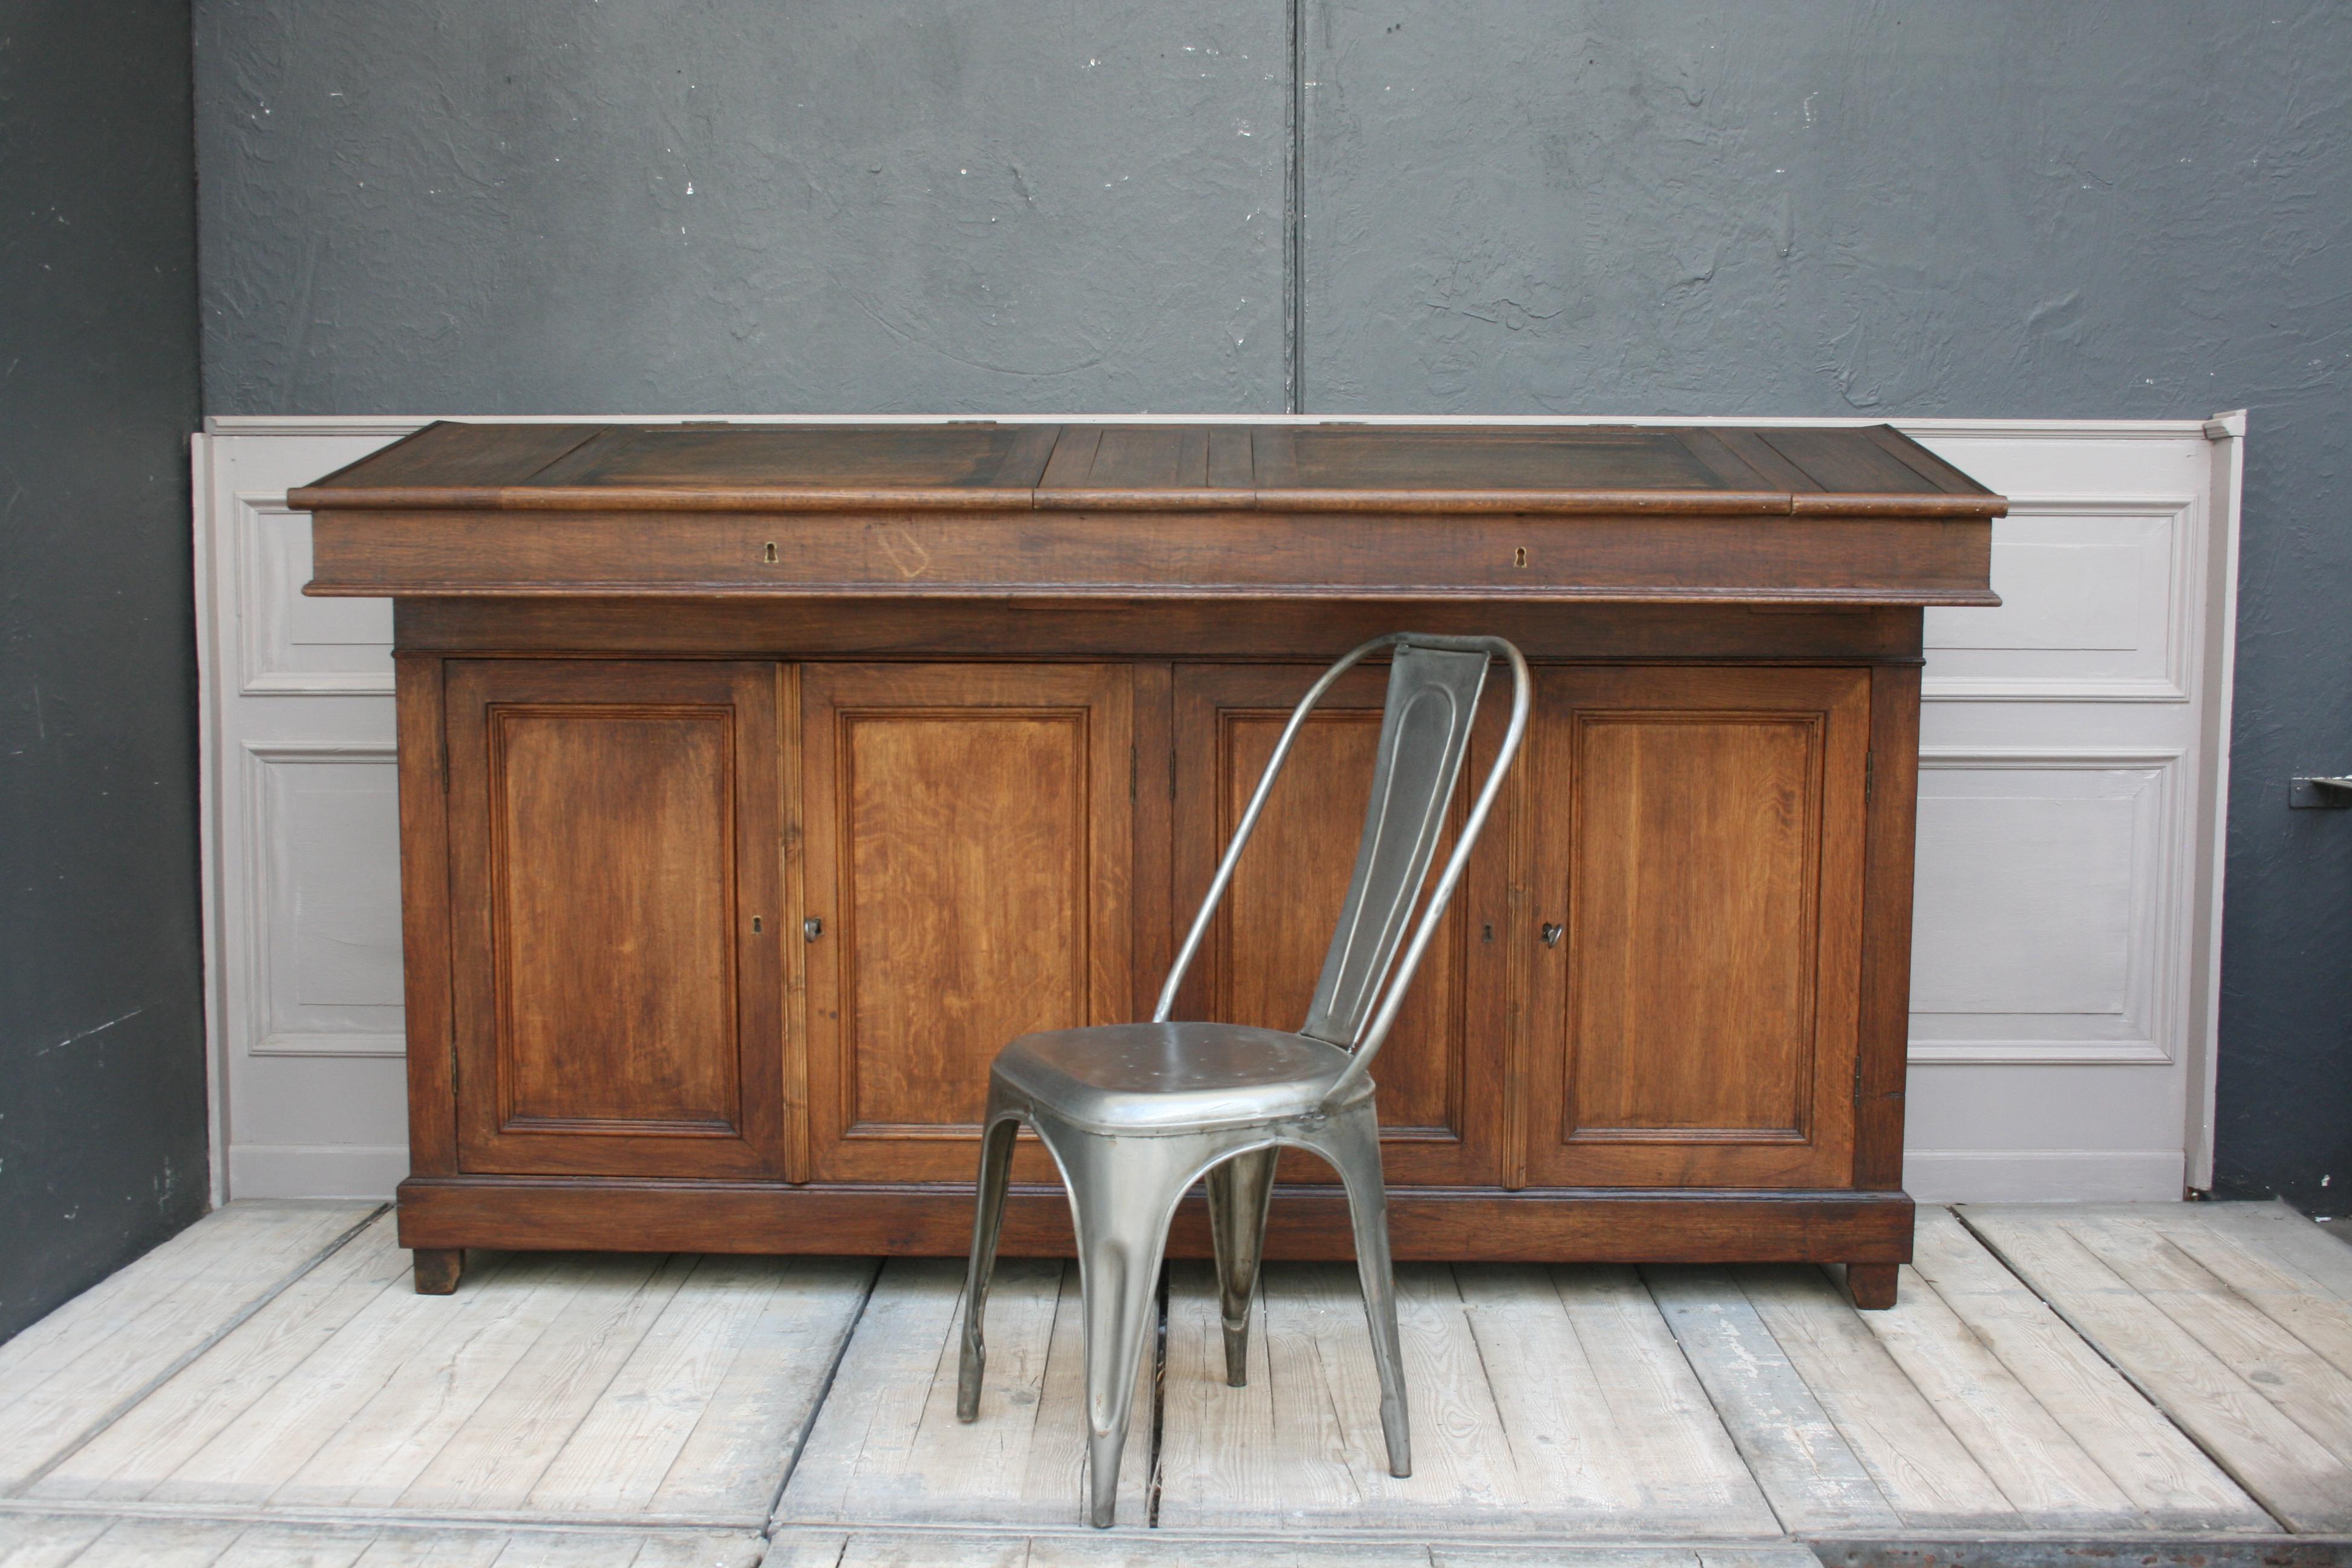 An original old large factory office lectern from France from circa 1880, made of solid oak.
It consists of 2 parts, first the lower cabinet with 2 double doors, which can still be locked with the original bar lock, and second the console top with